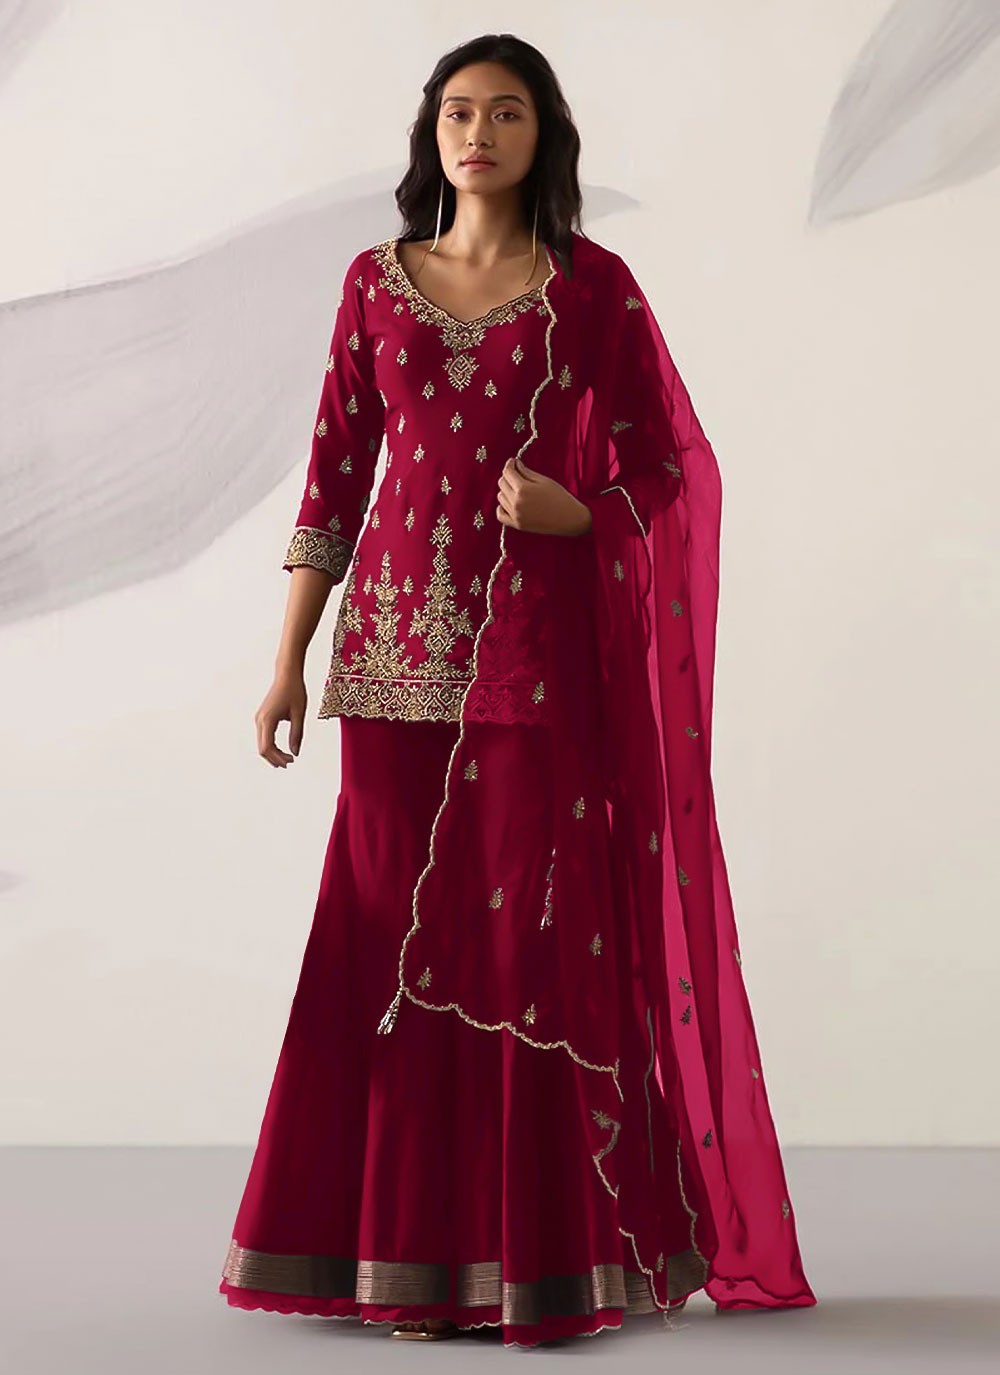 Embroidered Trendy Salwar Suit